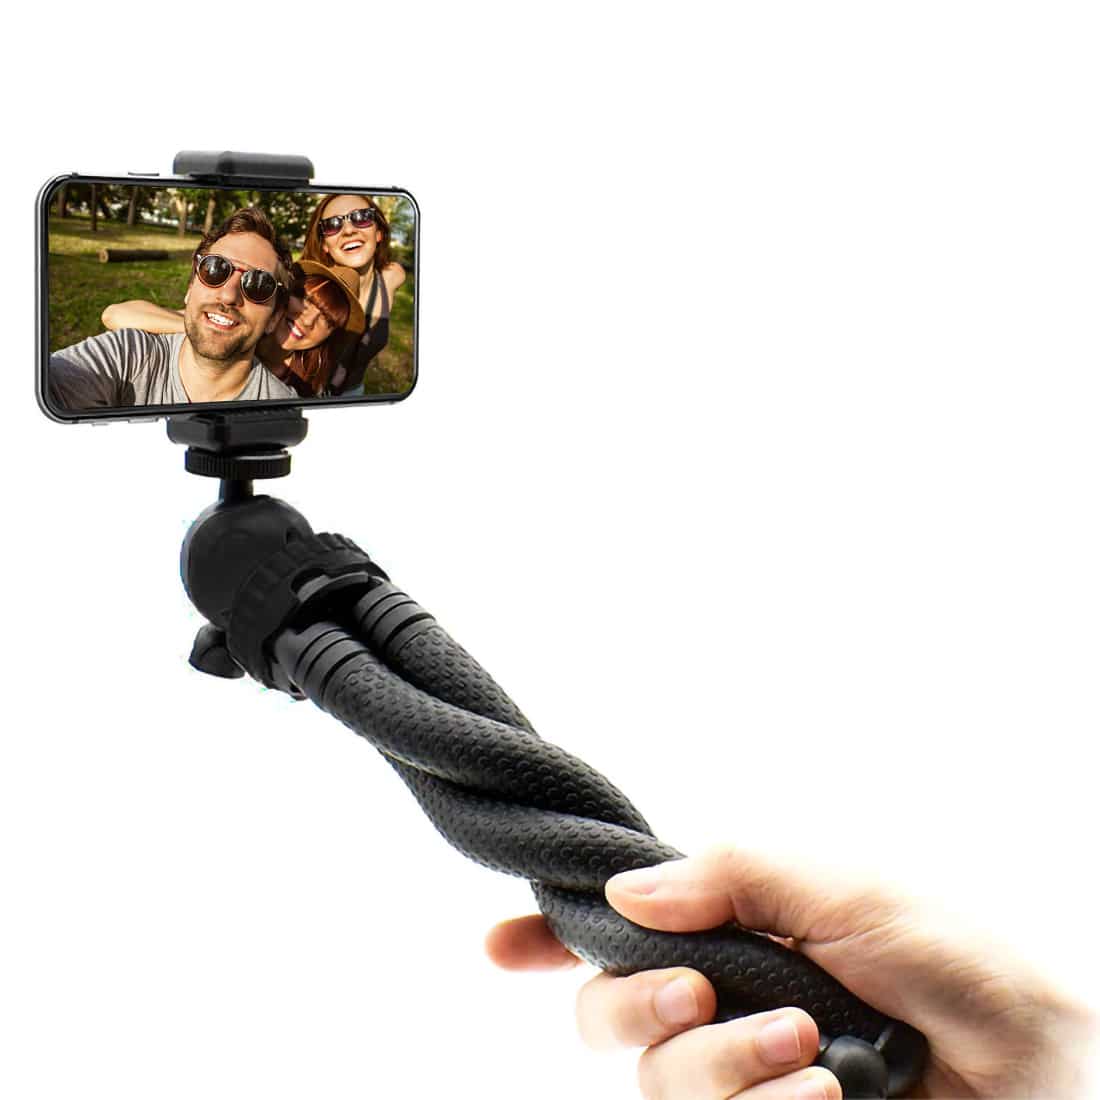 Flexible tripod with extra sturdy legs SET: includes phone holder, bluetooth remote shutter, GoPro mount adapter storage bag